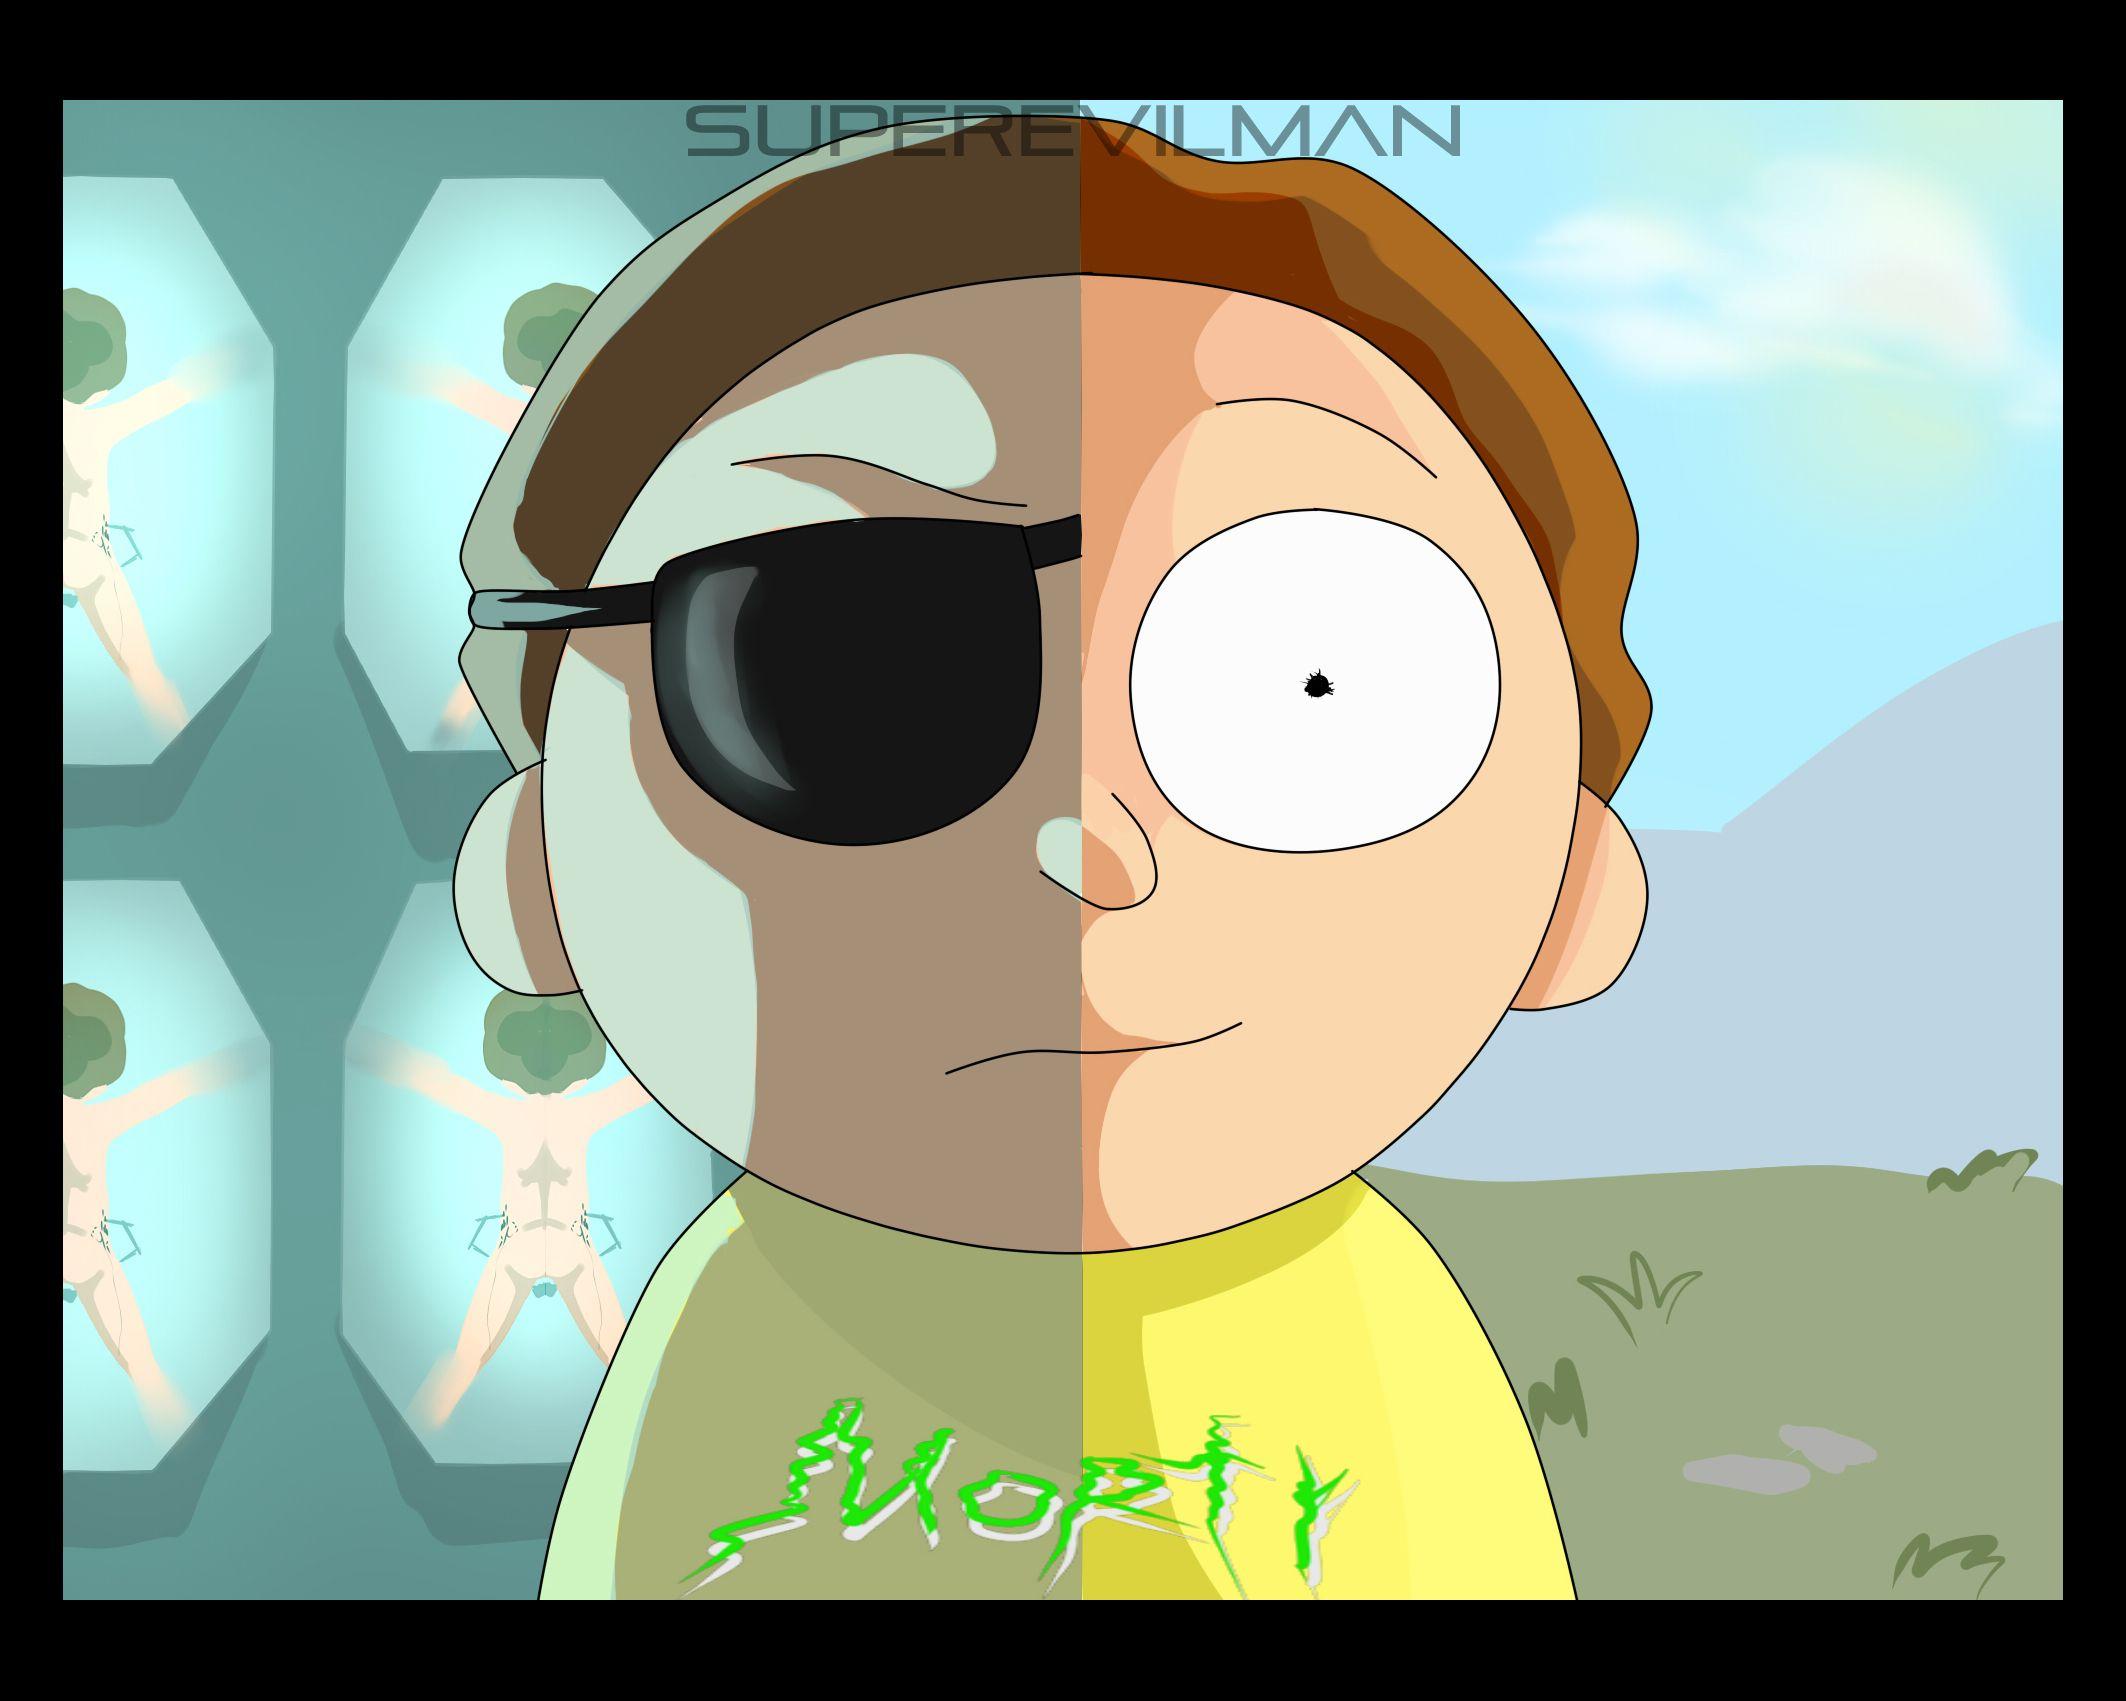 Evil Morty and Good Morty